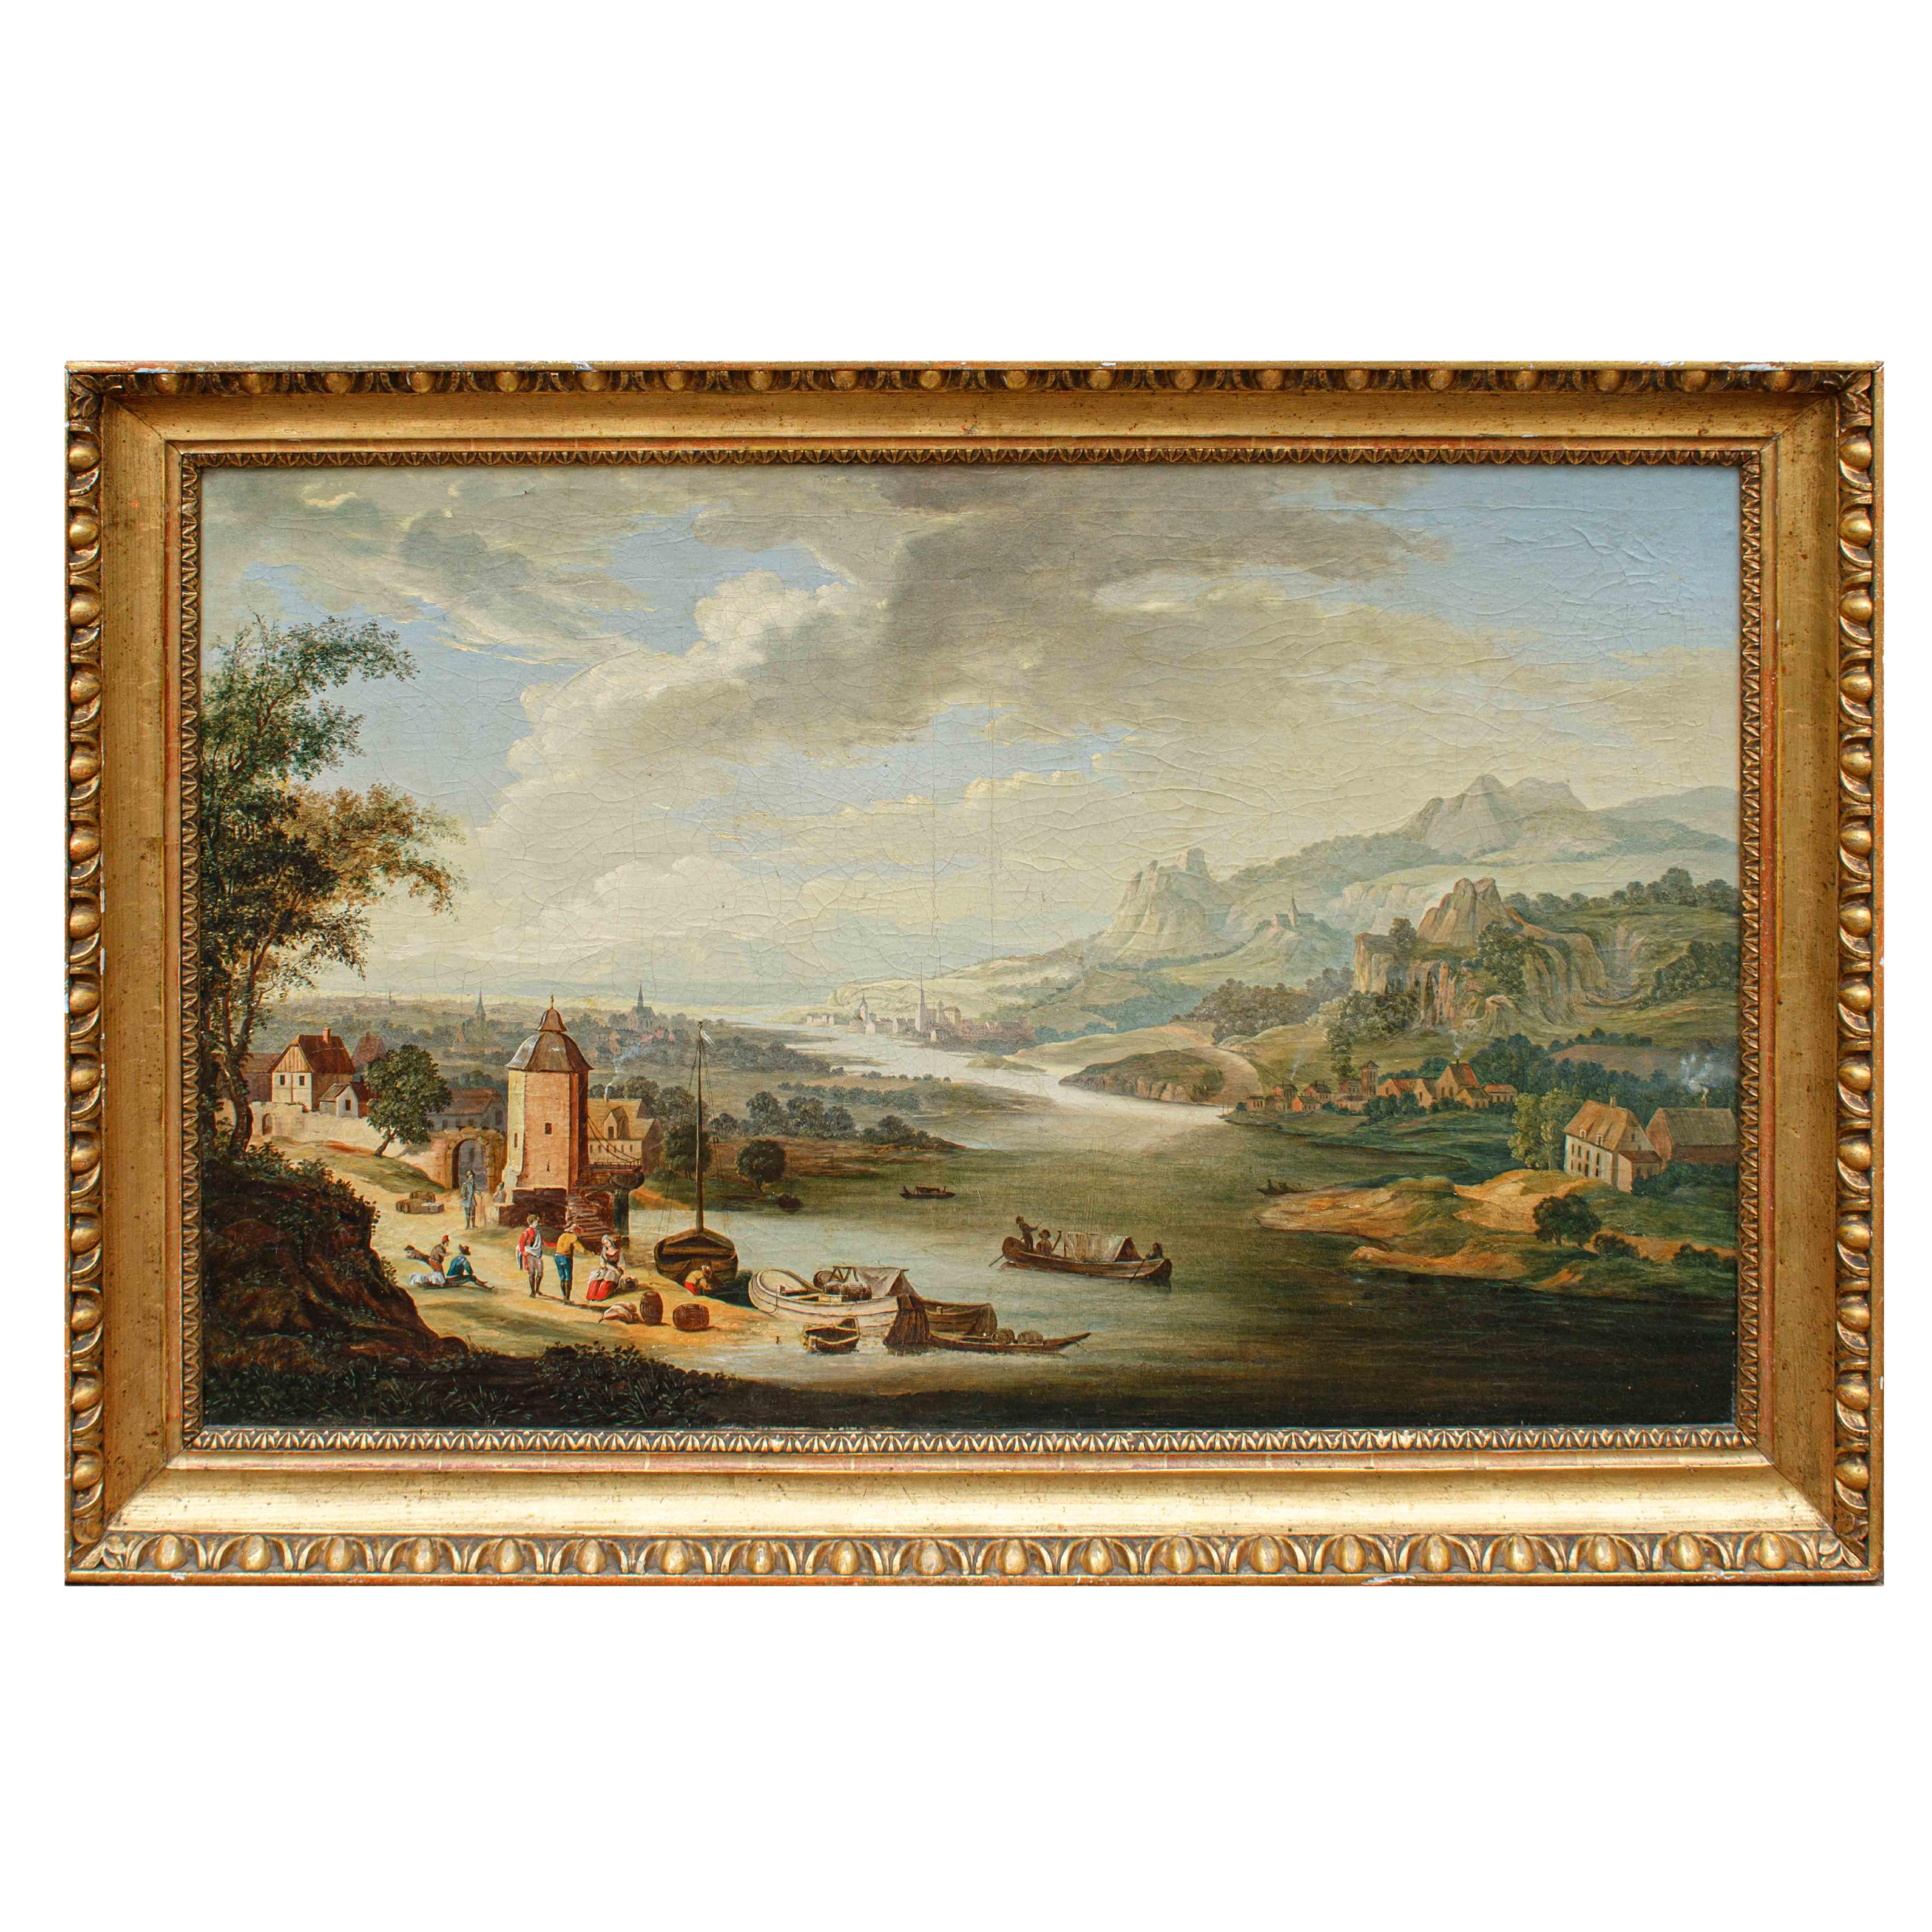 River landscape of late 18th century - early 19th century